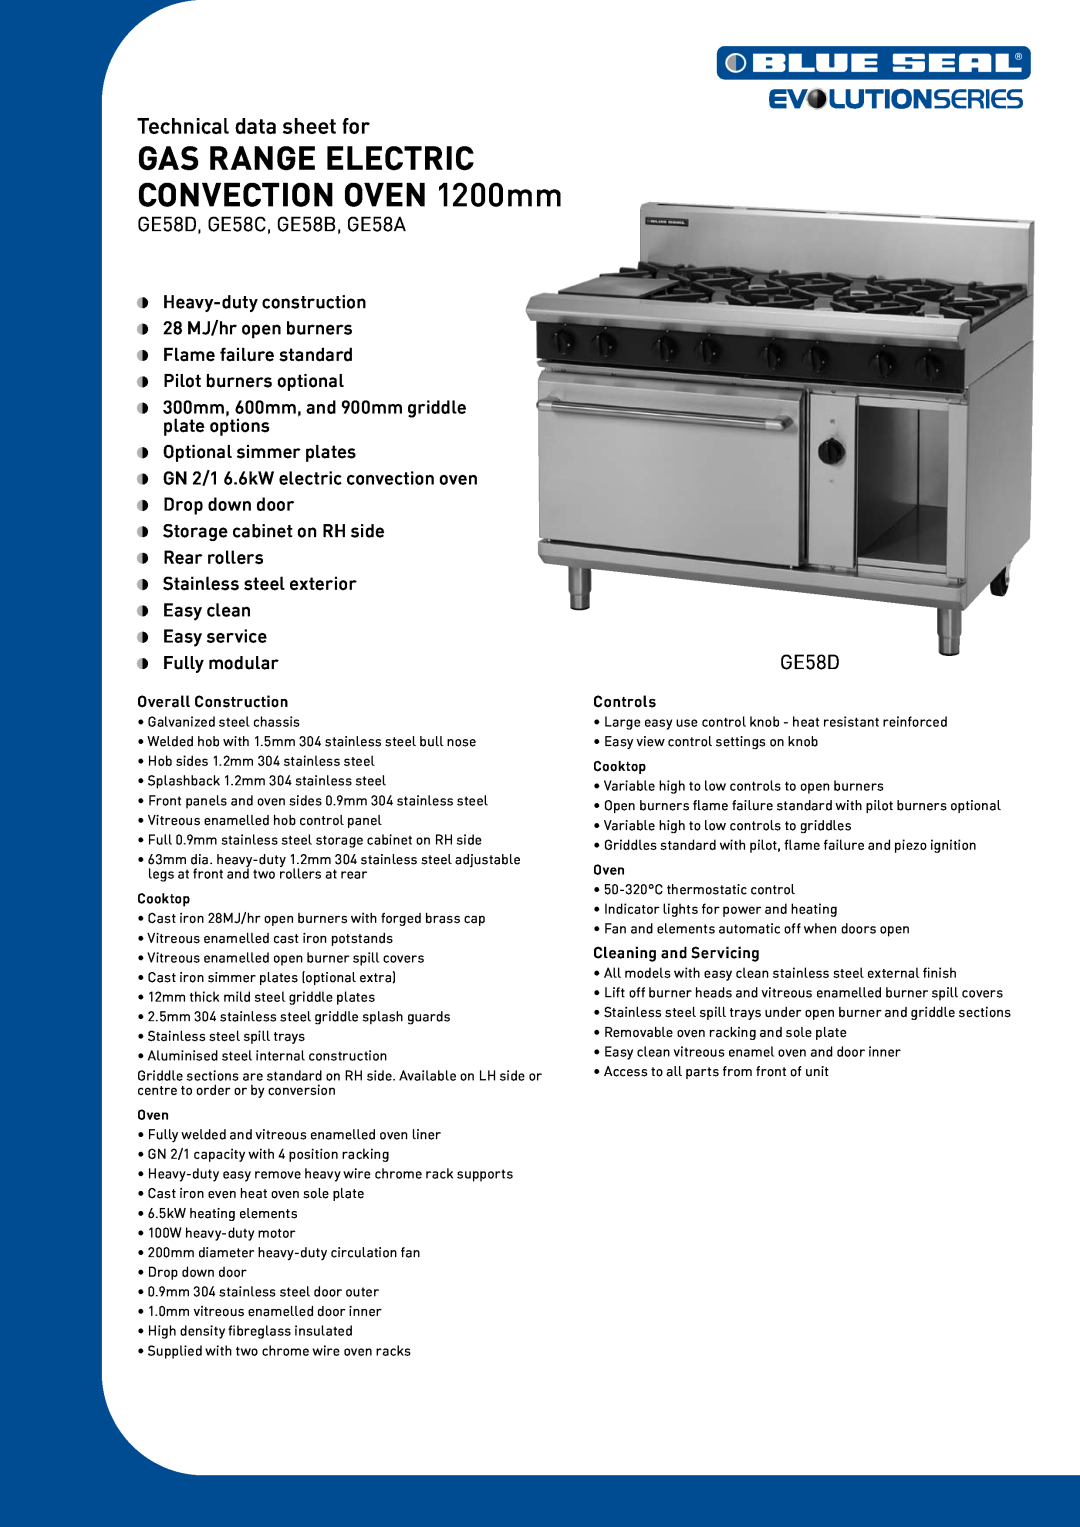 Moffat GE58A manual GAS RANGE ELECTRIC CONVECTION OVEN 1200mm, Technical data sheet for, Overall Construction, Controls 